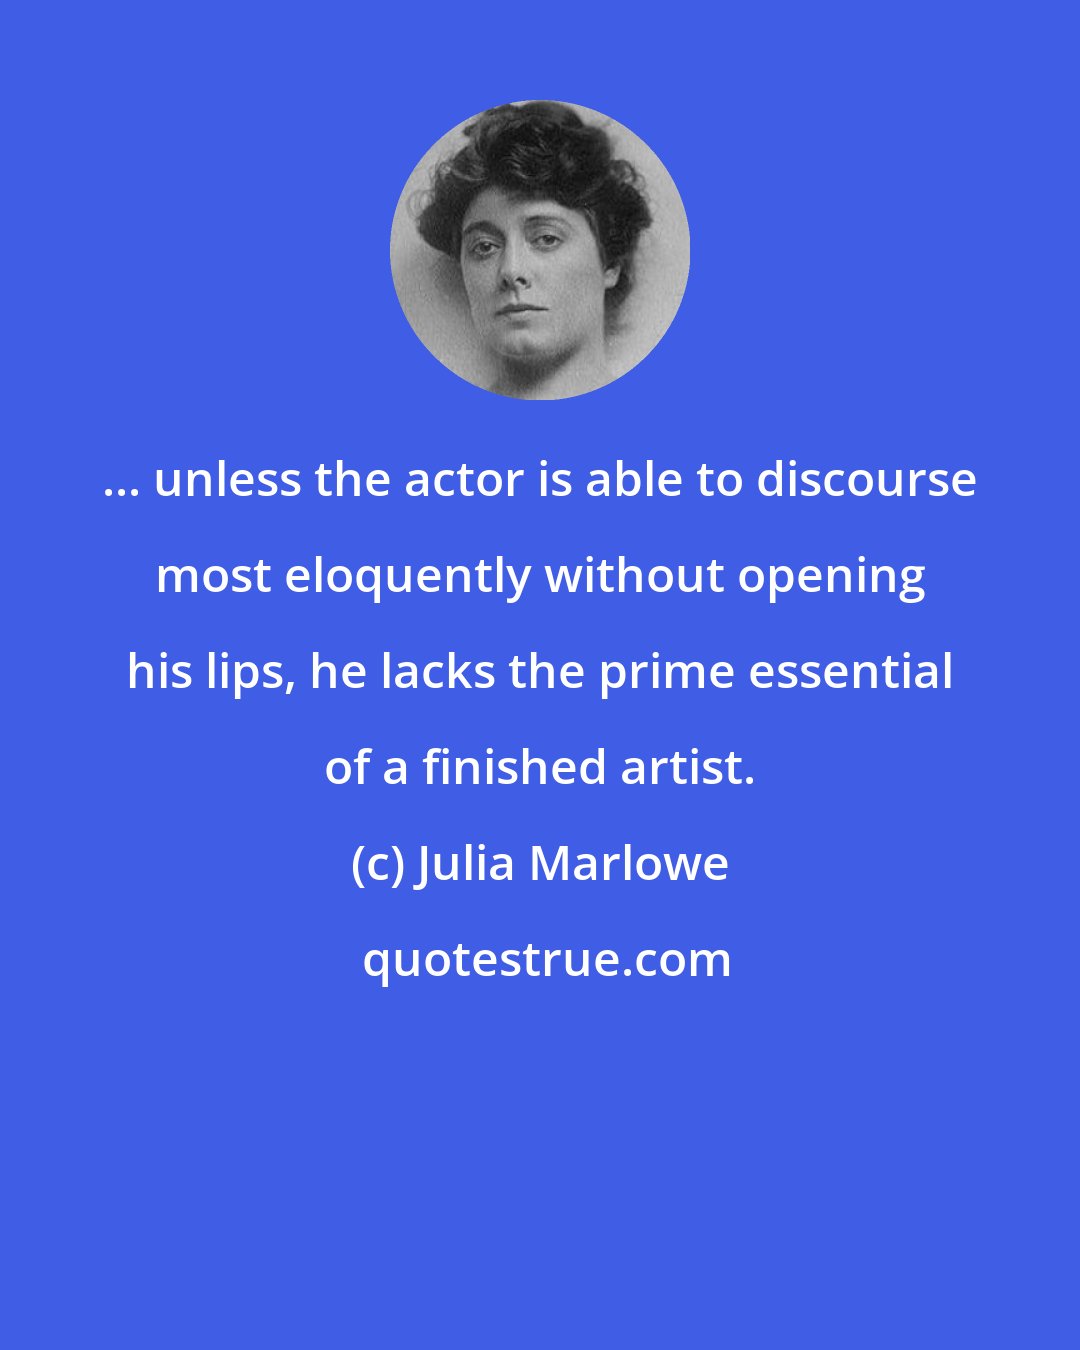 Julia Marlowe: ... unless the actor is able to discourse most eloquently without opening his lips, he lacks the prime essential of a finished artist.